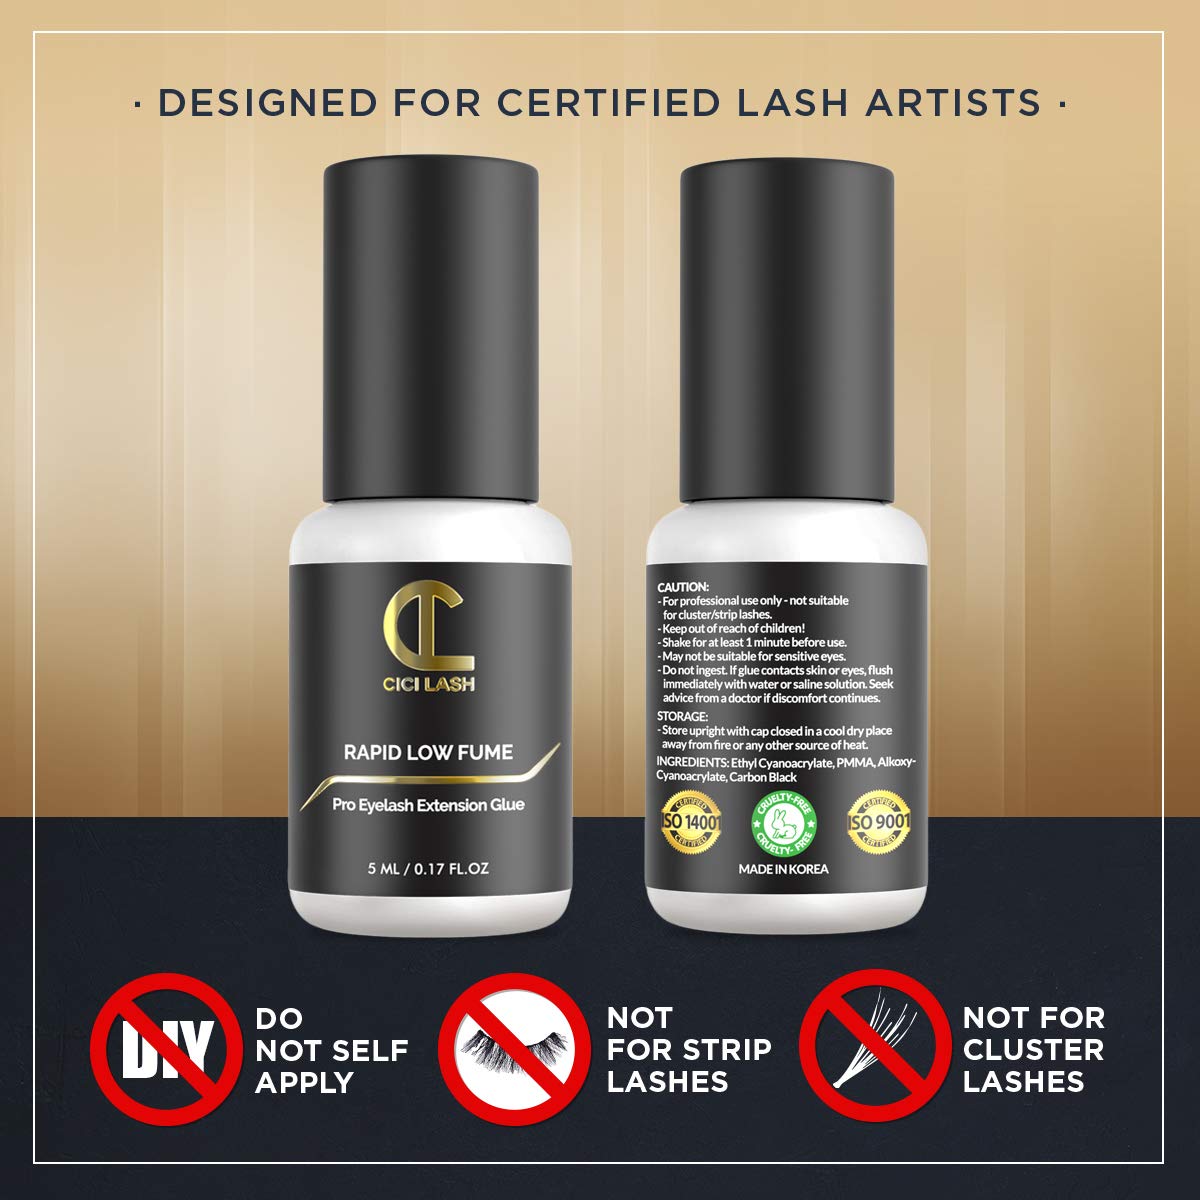 CICI Lash Rapid Low Fume Eyelash Extension Glue for Professionals - Maximum 8 Week Retention / 1 Second Drying Time Semi Permanent Individ